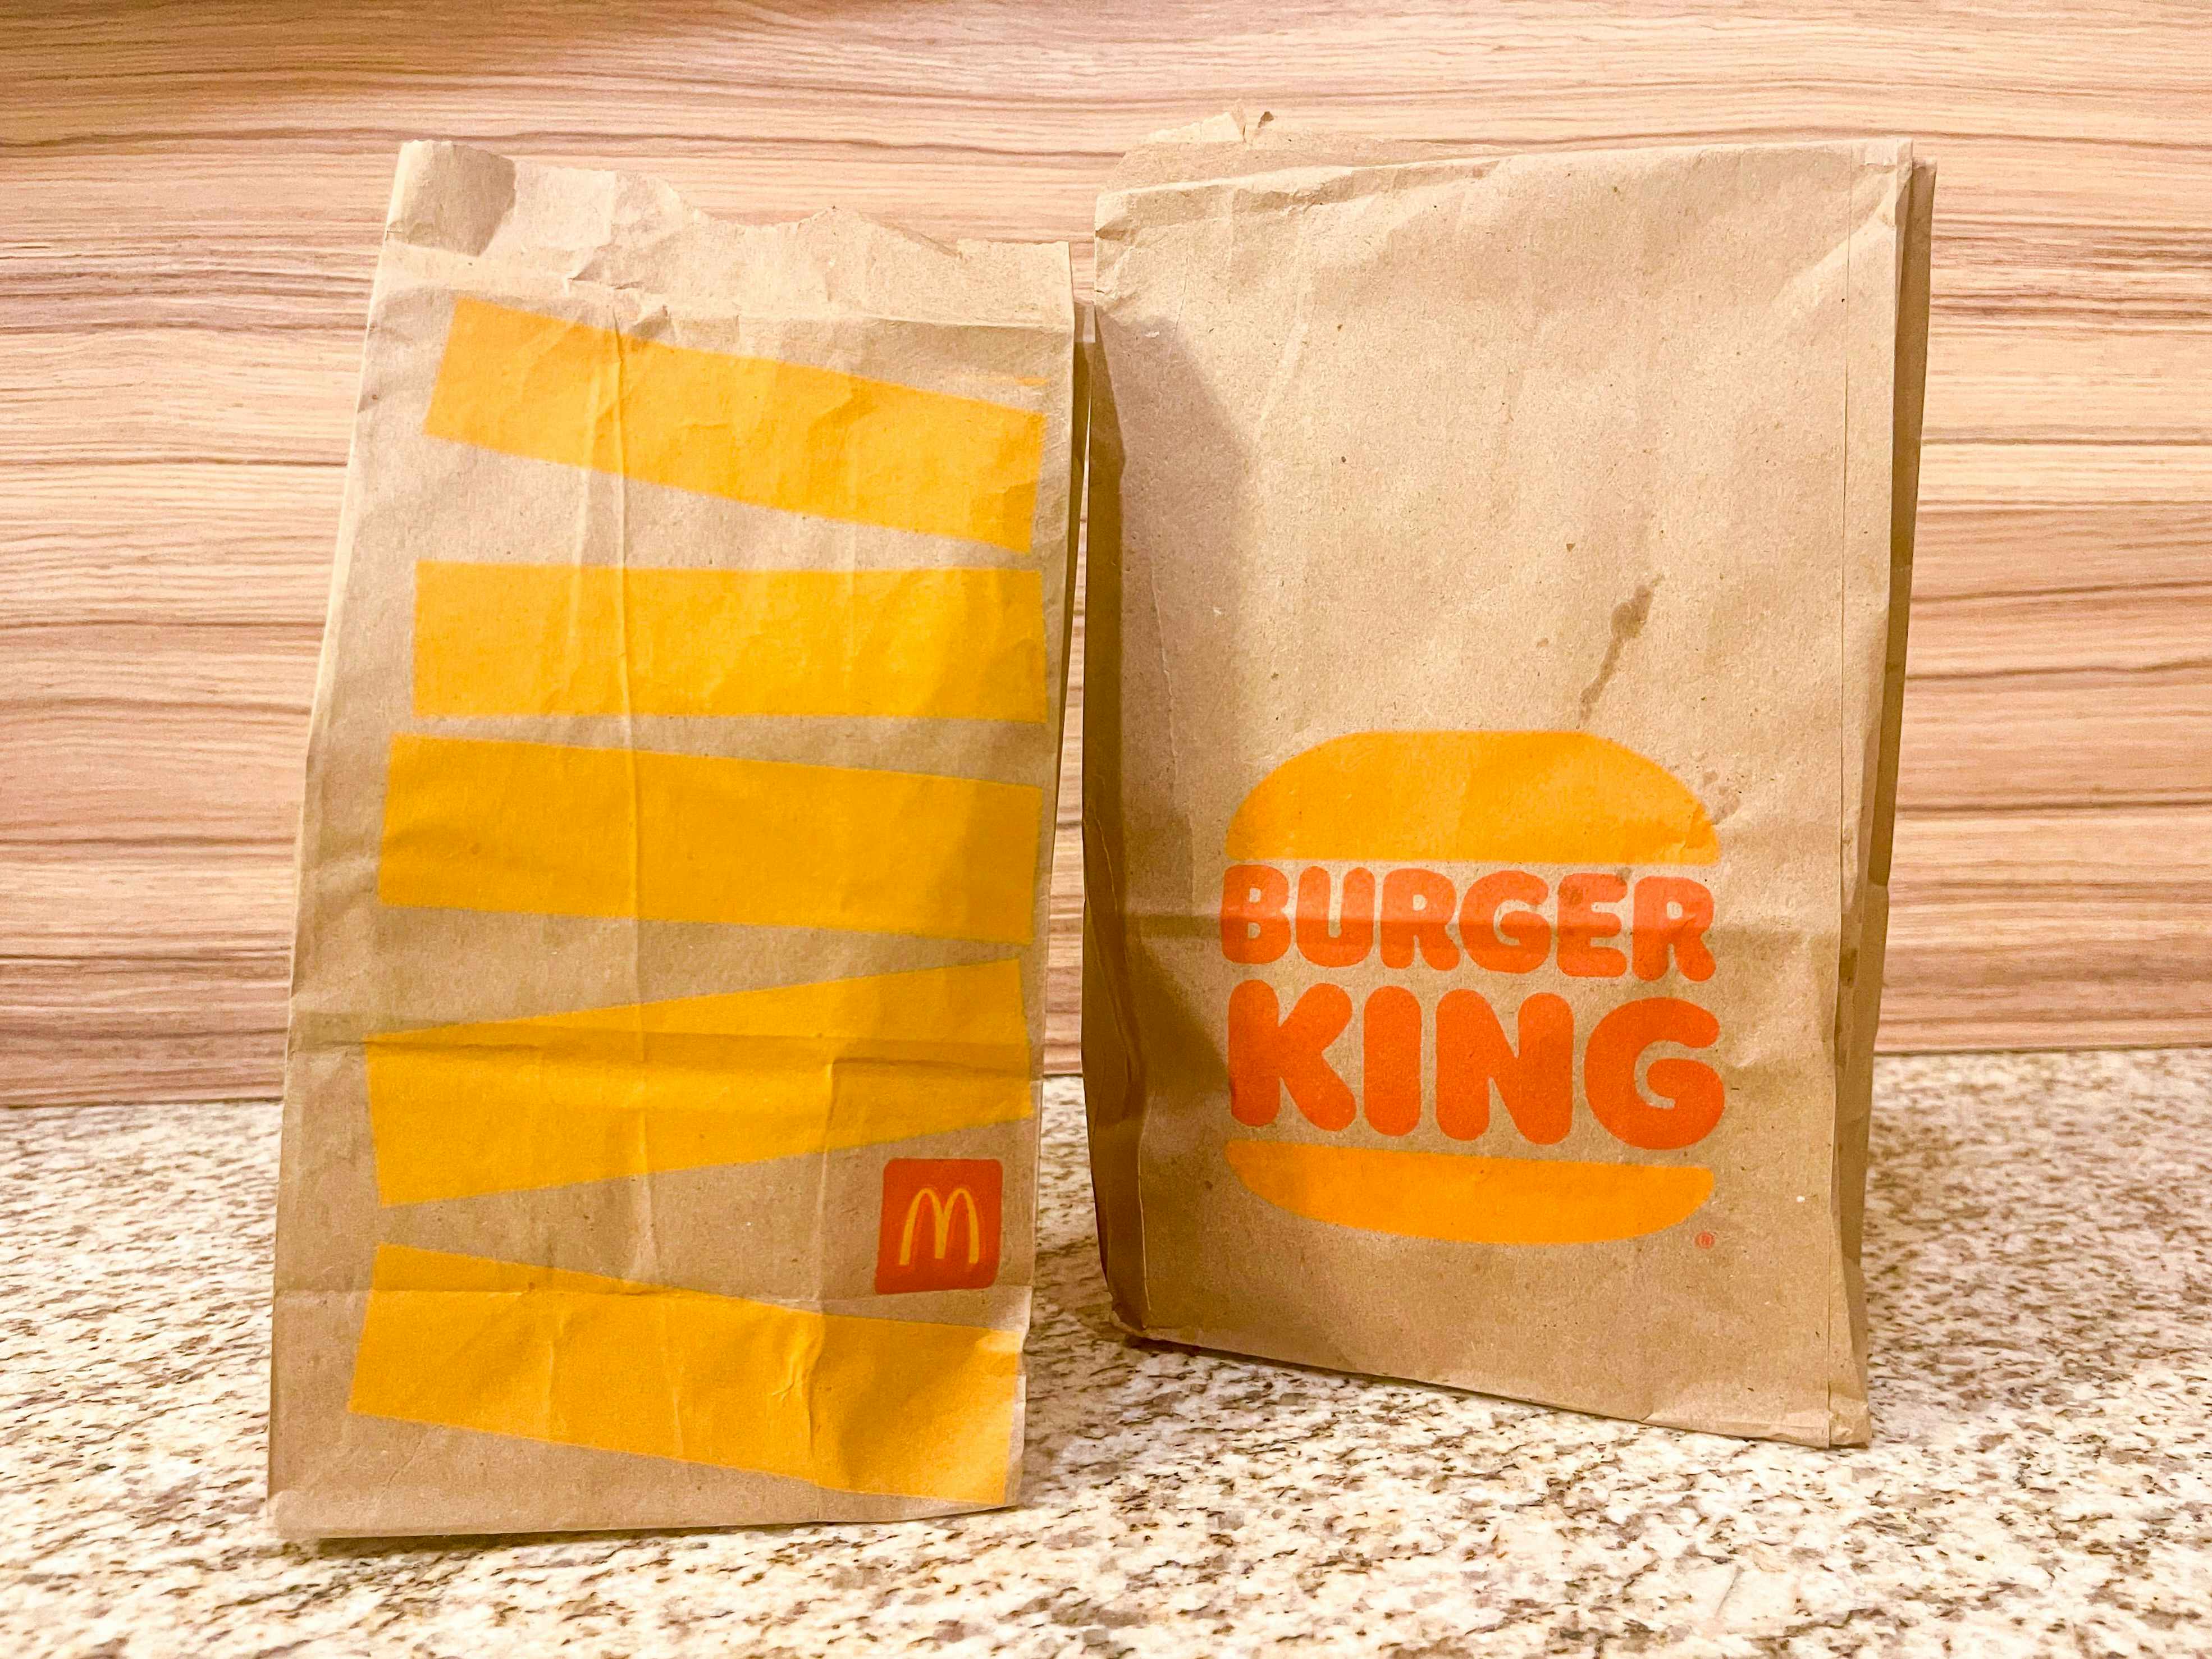 Burger King offers 5 For $4 meal deal - Atlanta on the Cheap